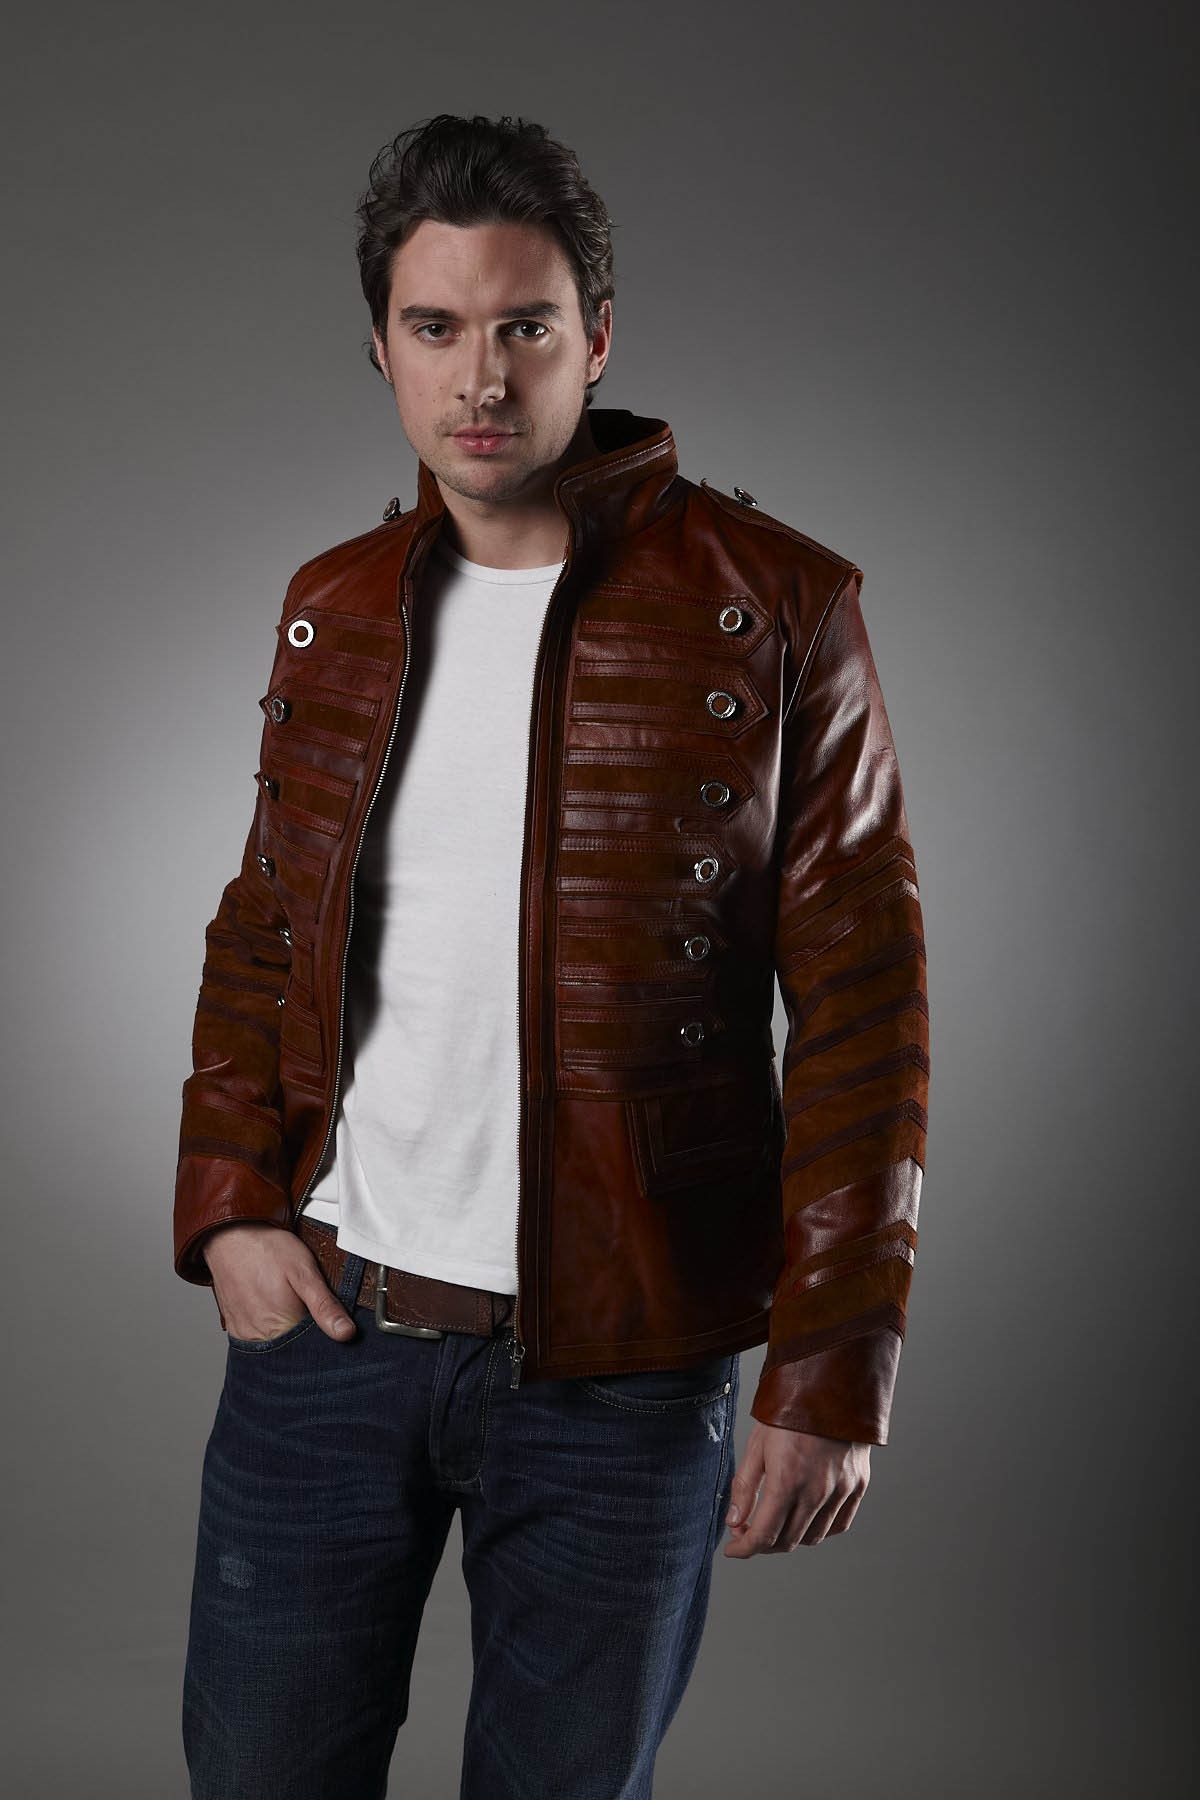 25 Best Leather Jackets For Men